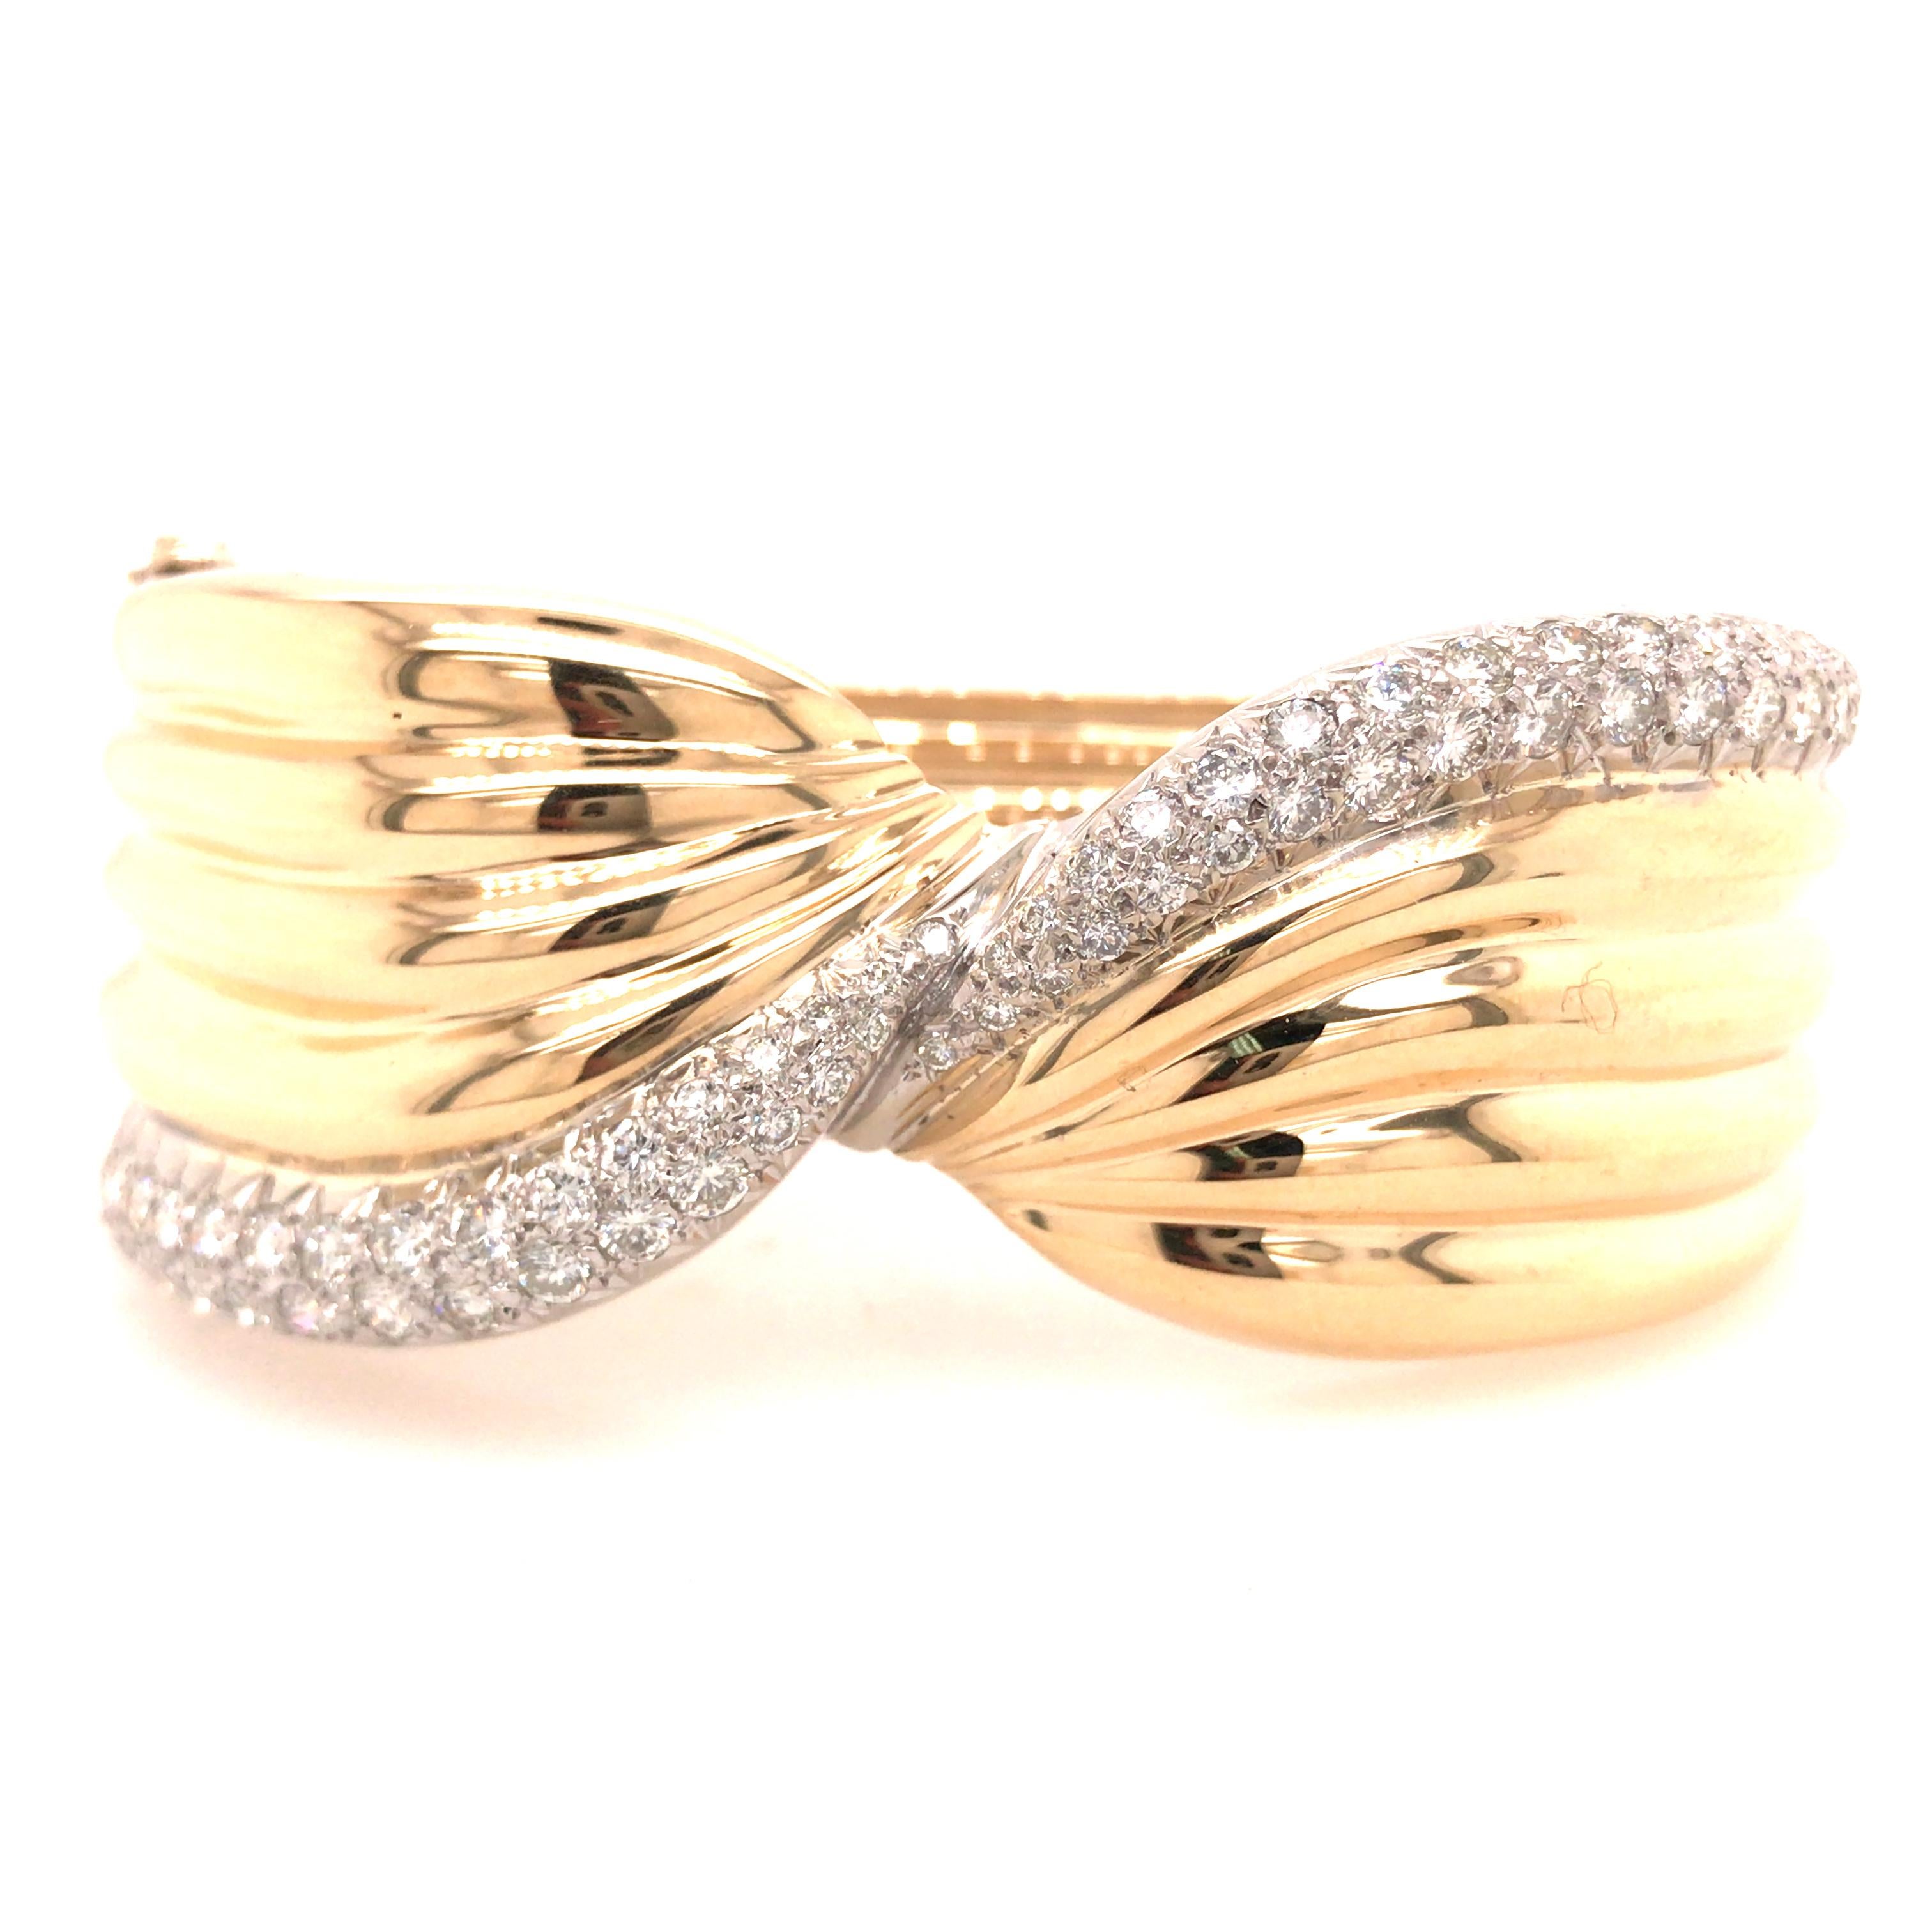 Wide Diamond Twist Cuff in 14K Two-Tone Gold.  Round Brilliant Cut Diamonds weighing approximately 4.32 carat total weight, G-H in color and VS in clarity are expertly set.  The Cuff measures 6 3/4 inch inner circumference and 1 inch in width at the